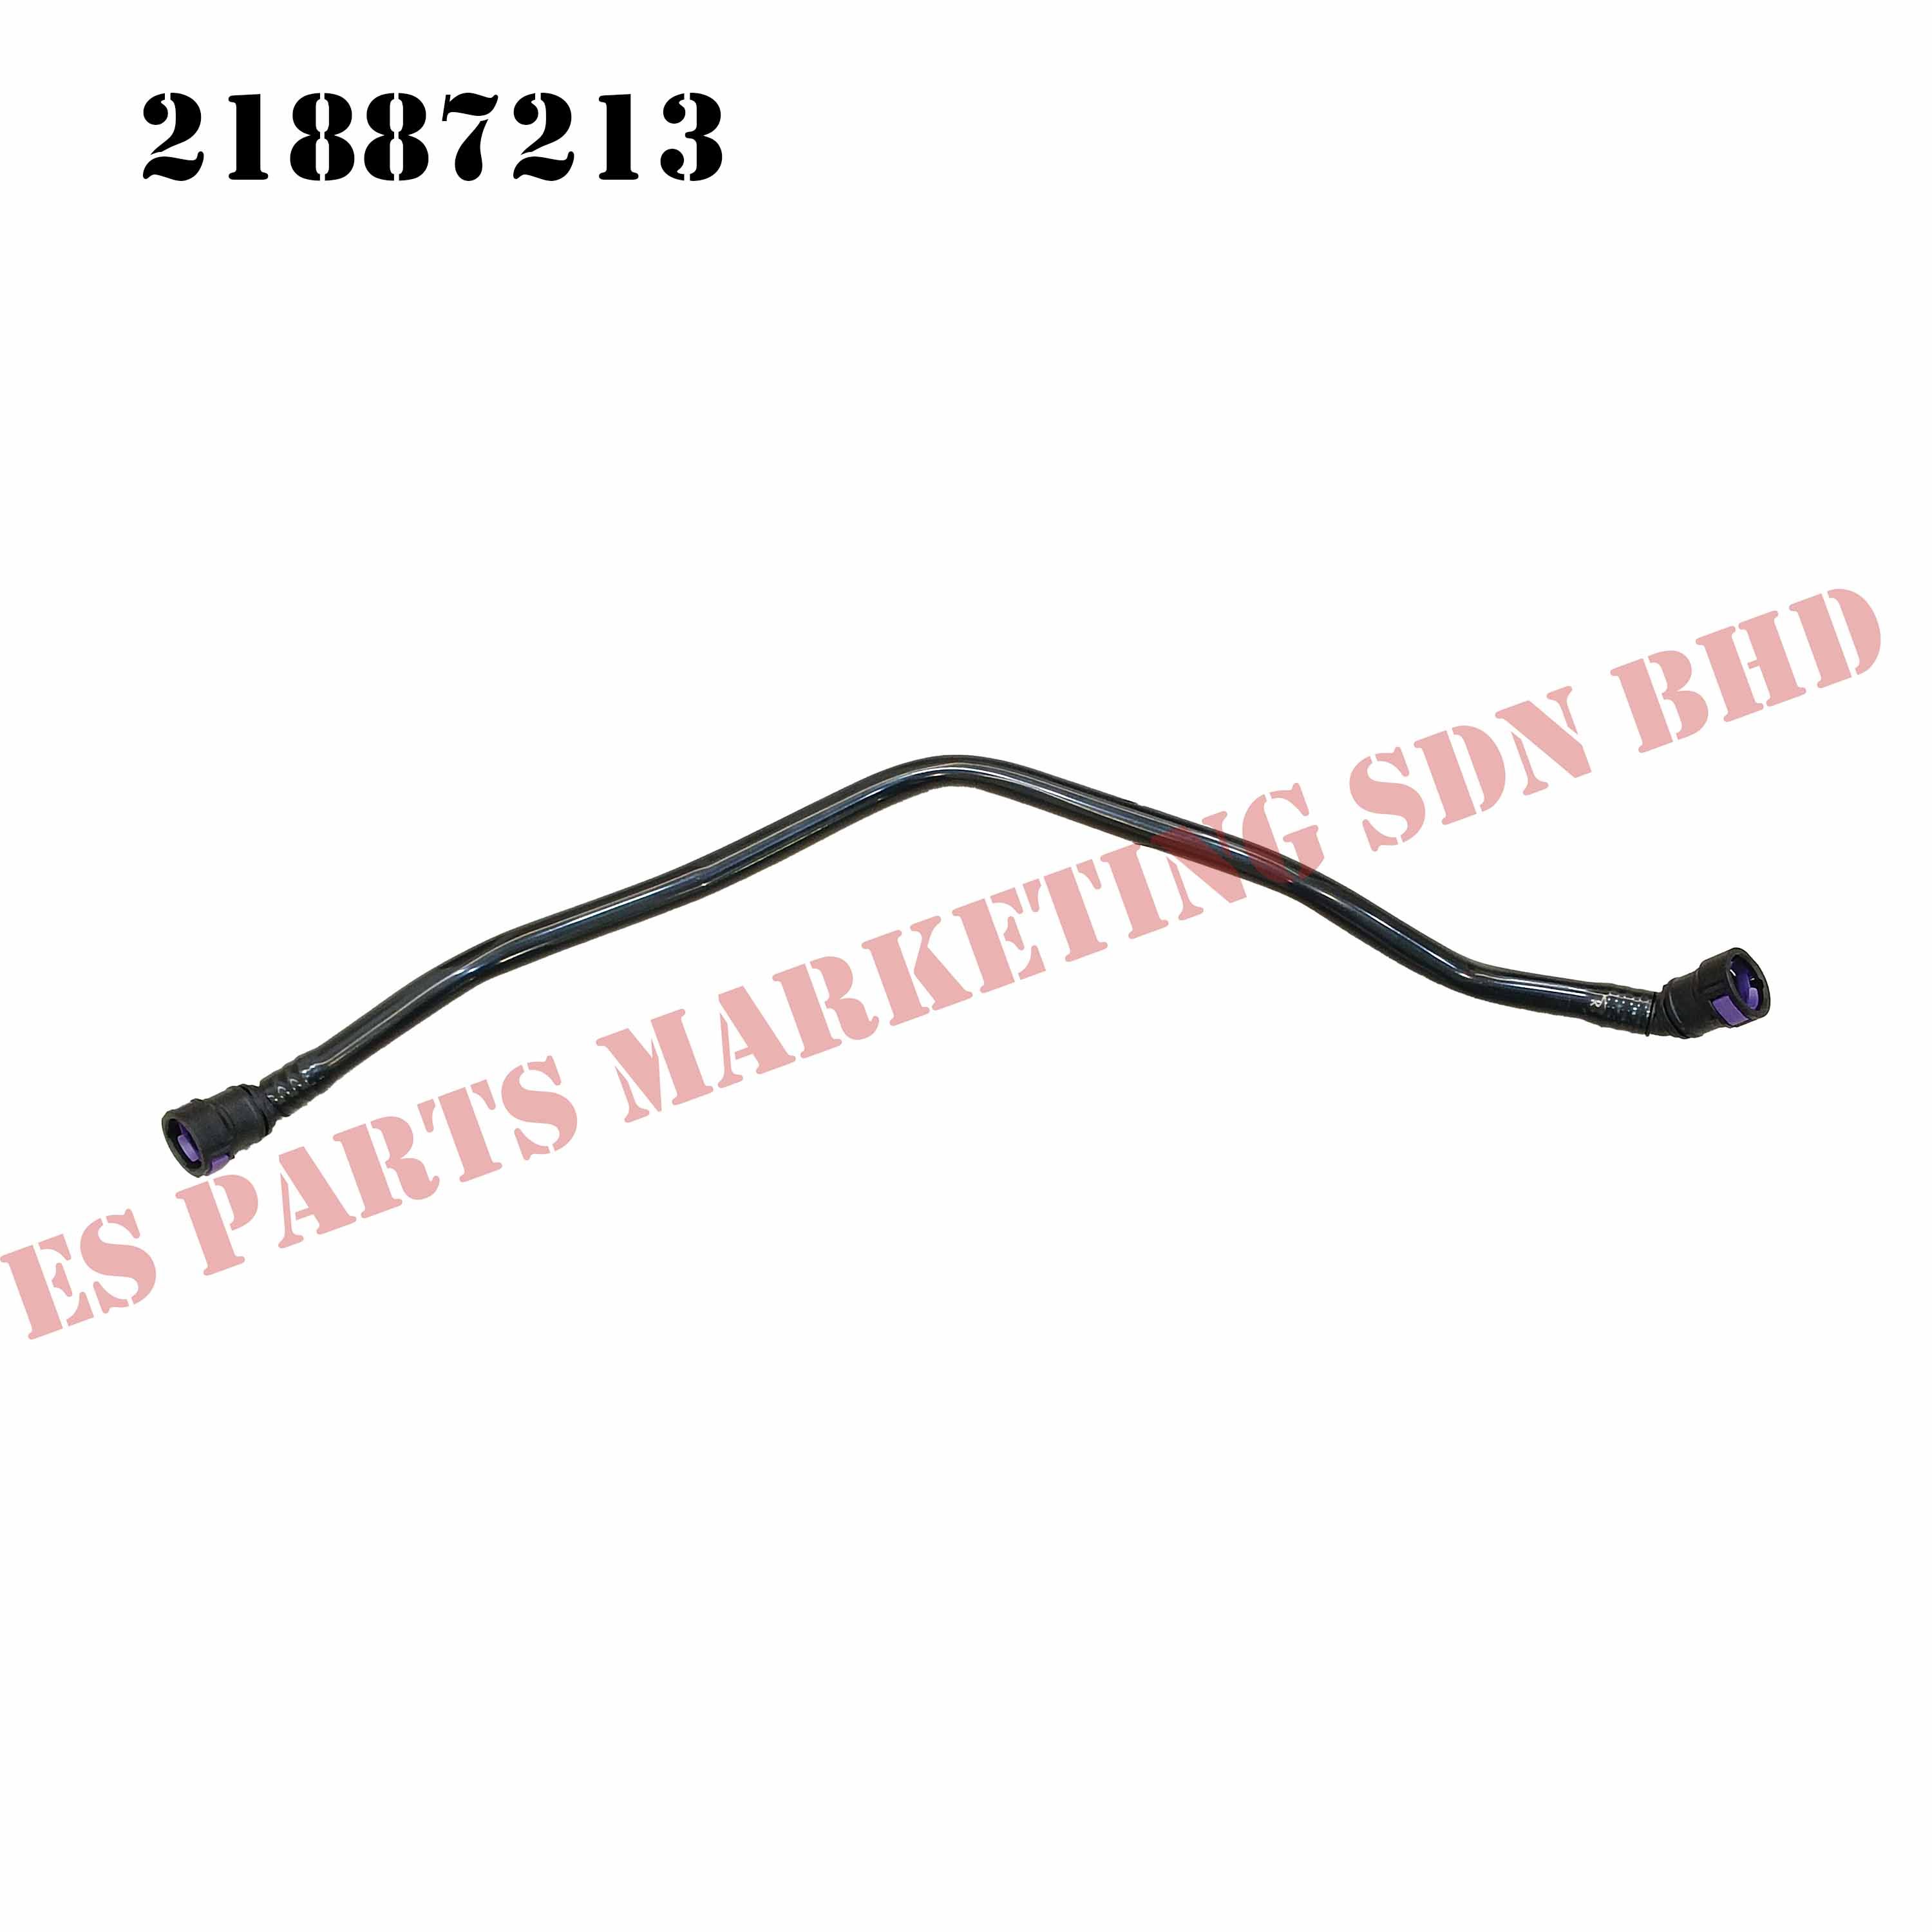 Volvo FM4 AT2412D AT2612D Gear Box Oil Cooler Pipe ASSY 21887213, 21339891, 21052612